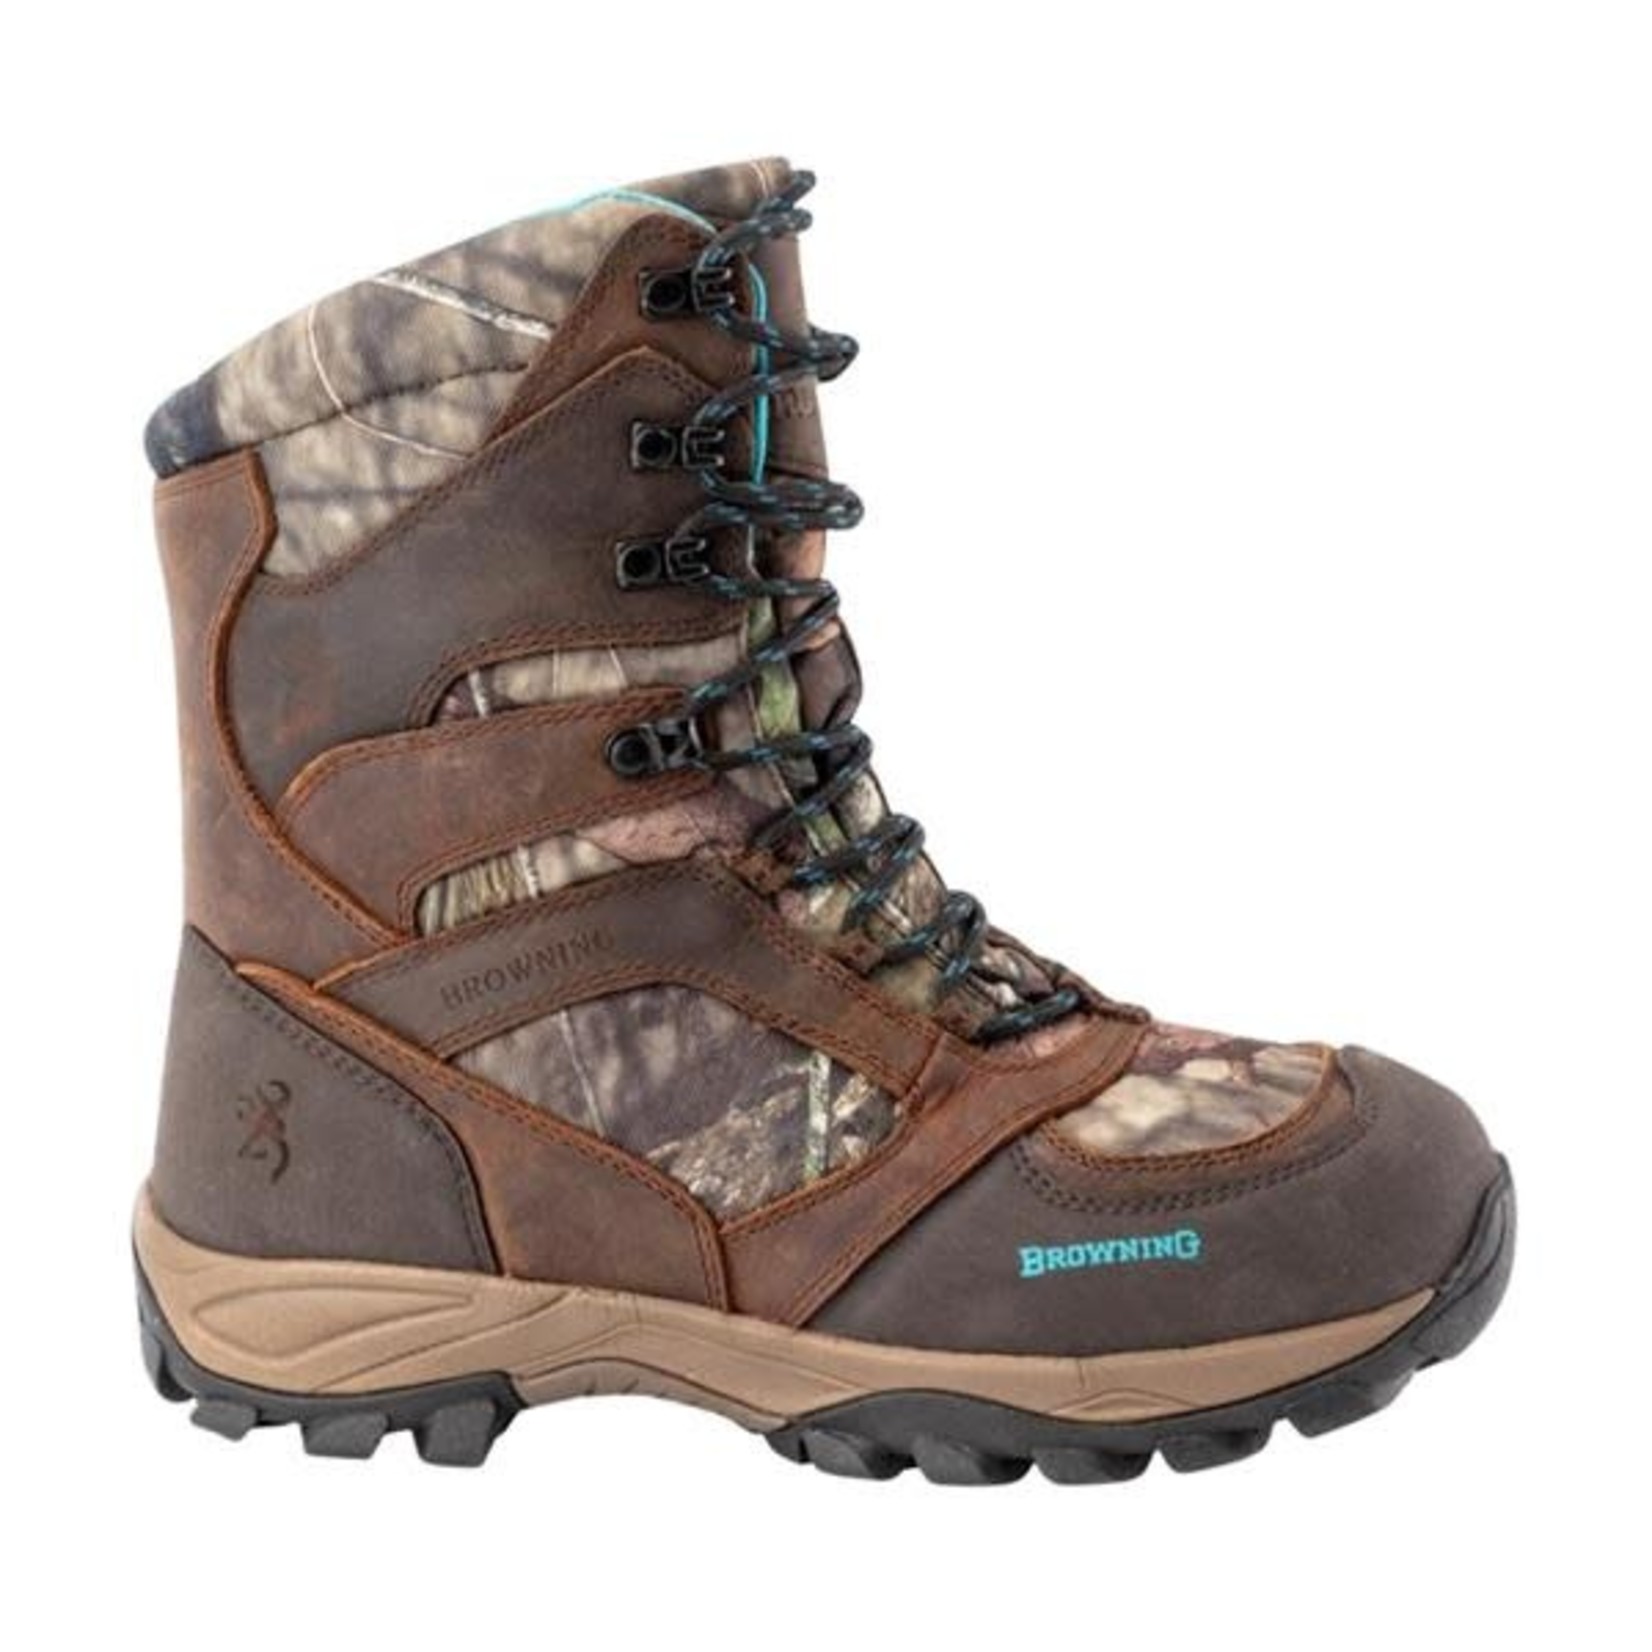 BROWNING Bottes Browning Mirage Femme Camouflage